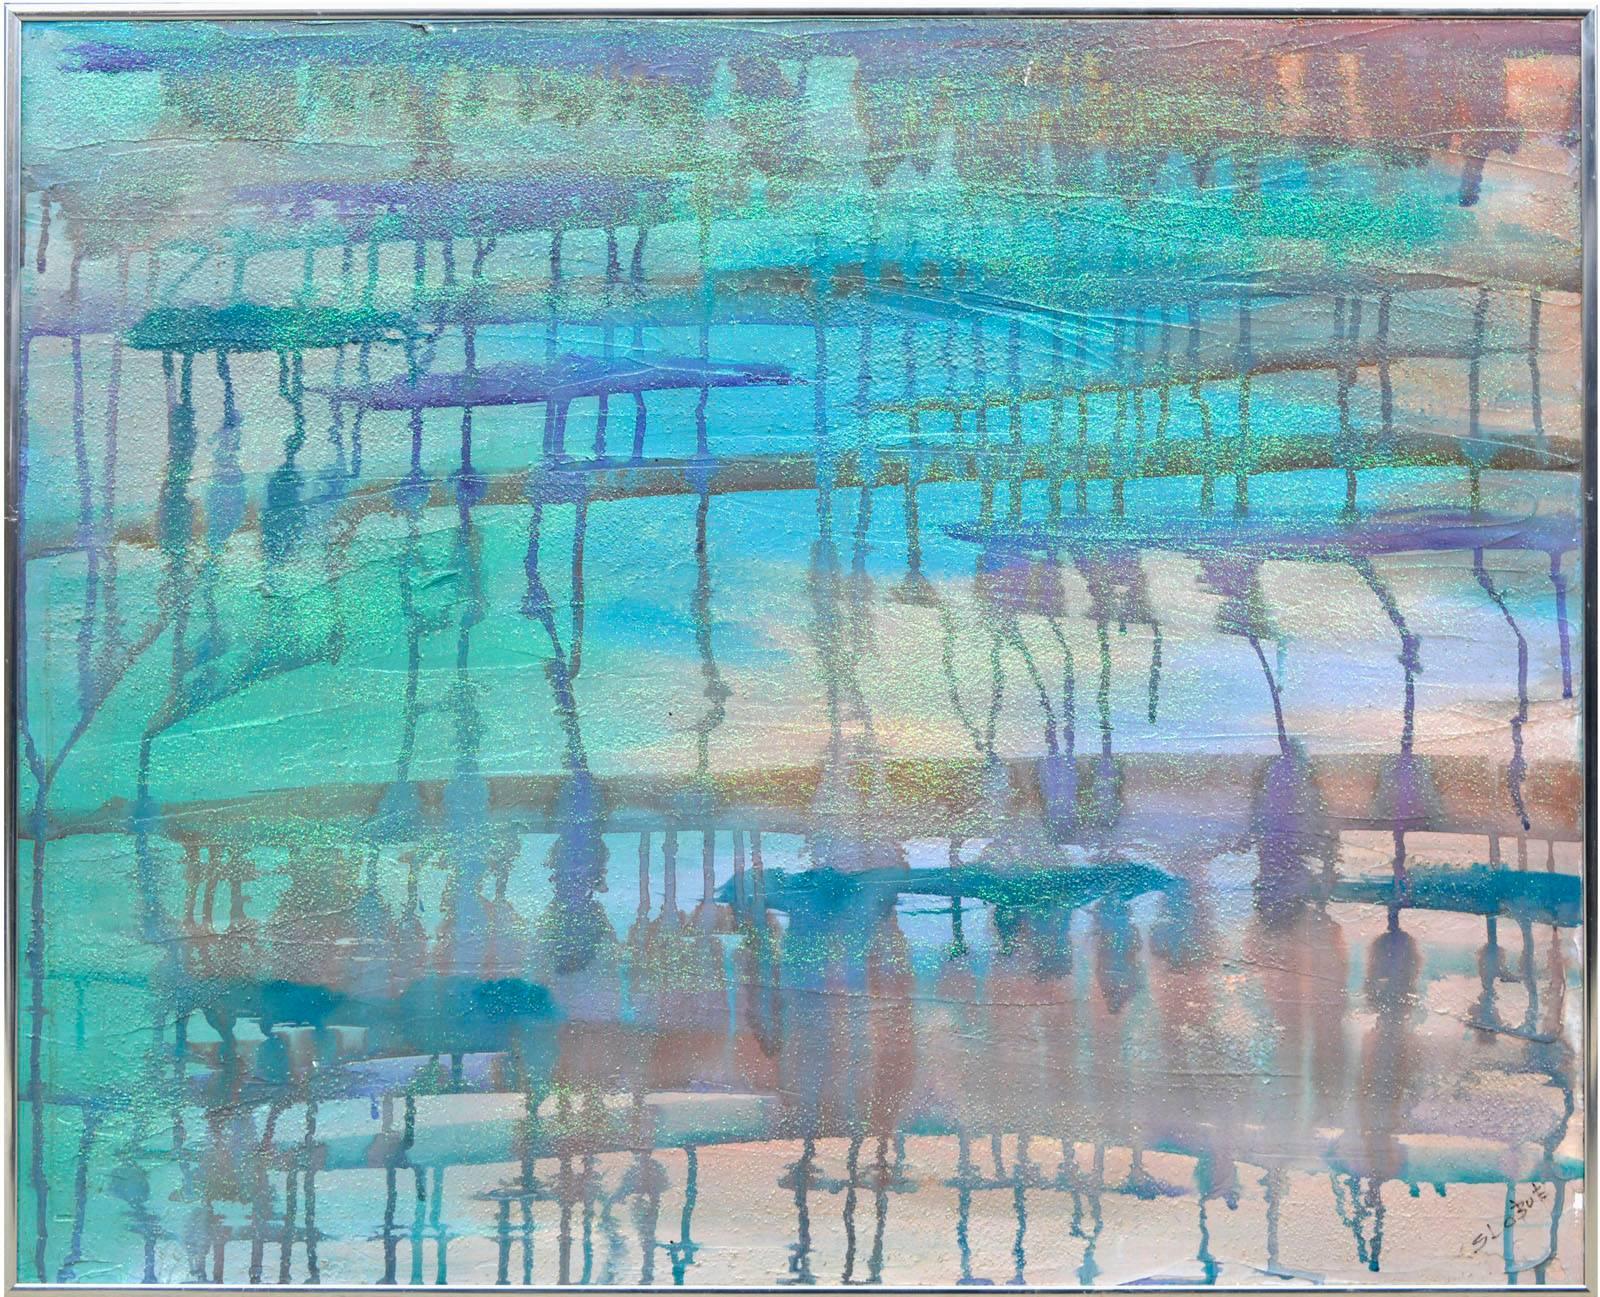 Multicolored Abstract